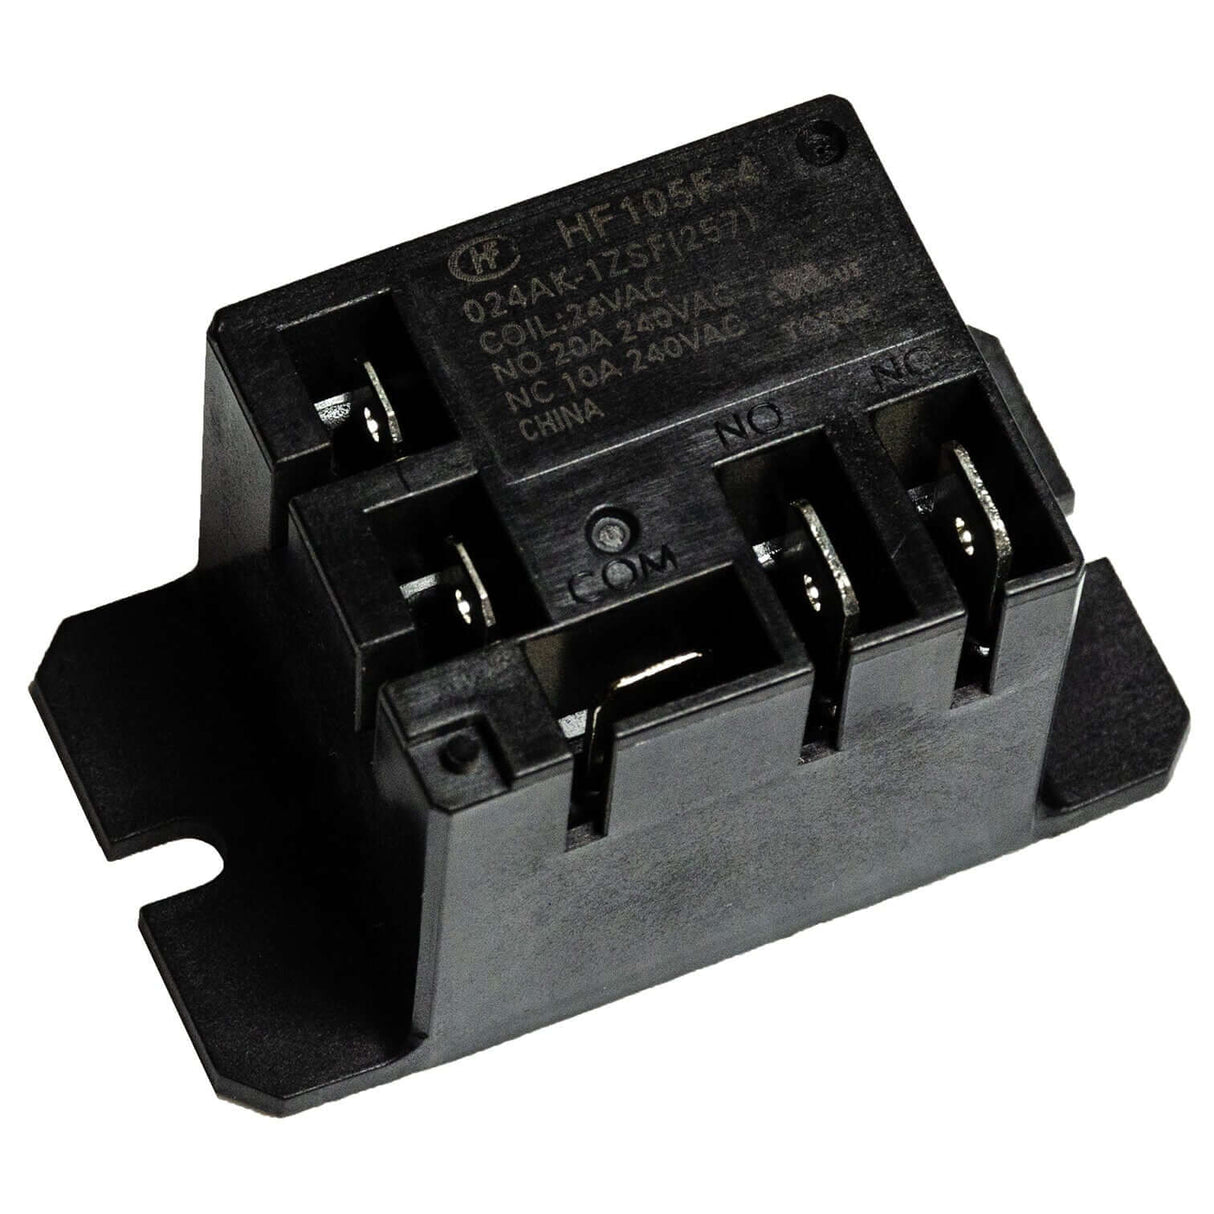 24V relay (Pump and Bi-Energy) for Thermo2000 boiler - Mini BTH Model